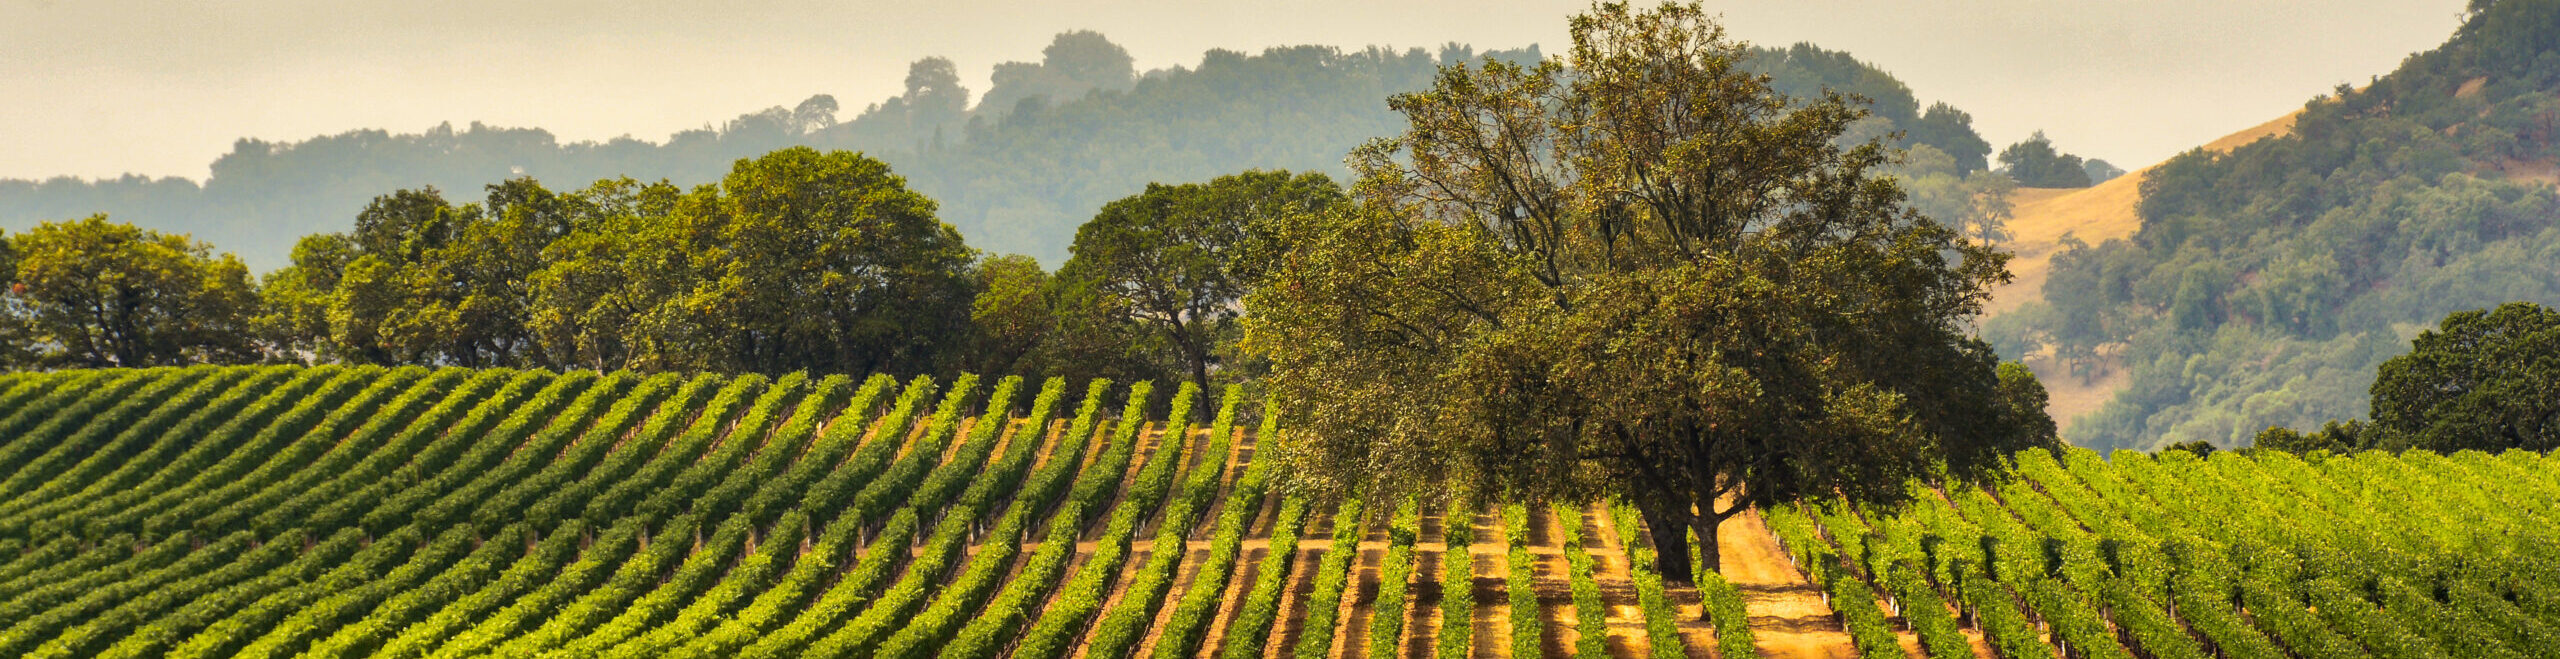 Panorama of a Vineyard with Oak Tree., Sonoma County, California